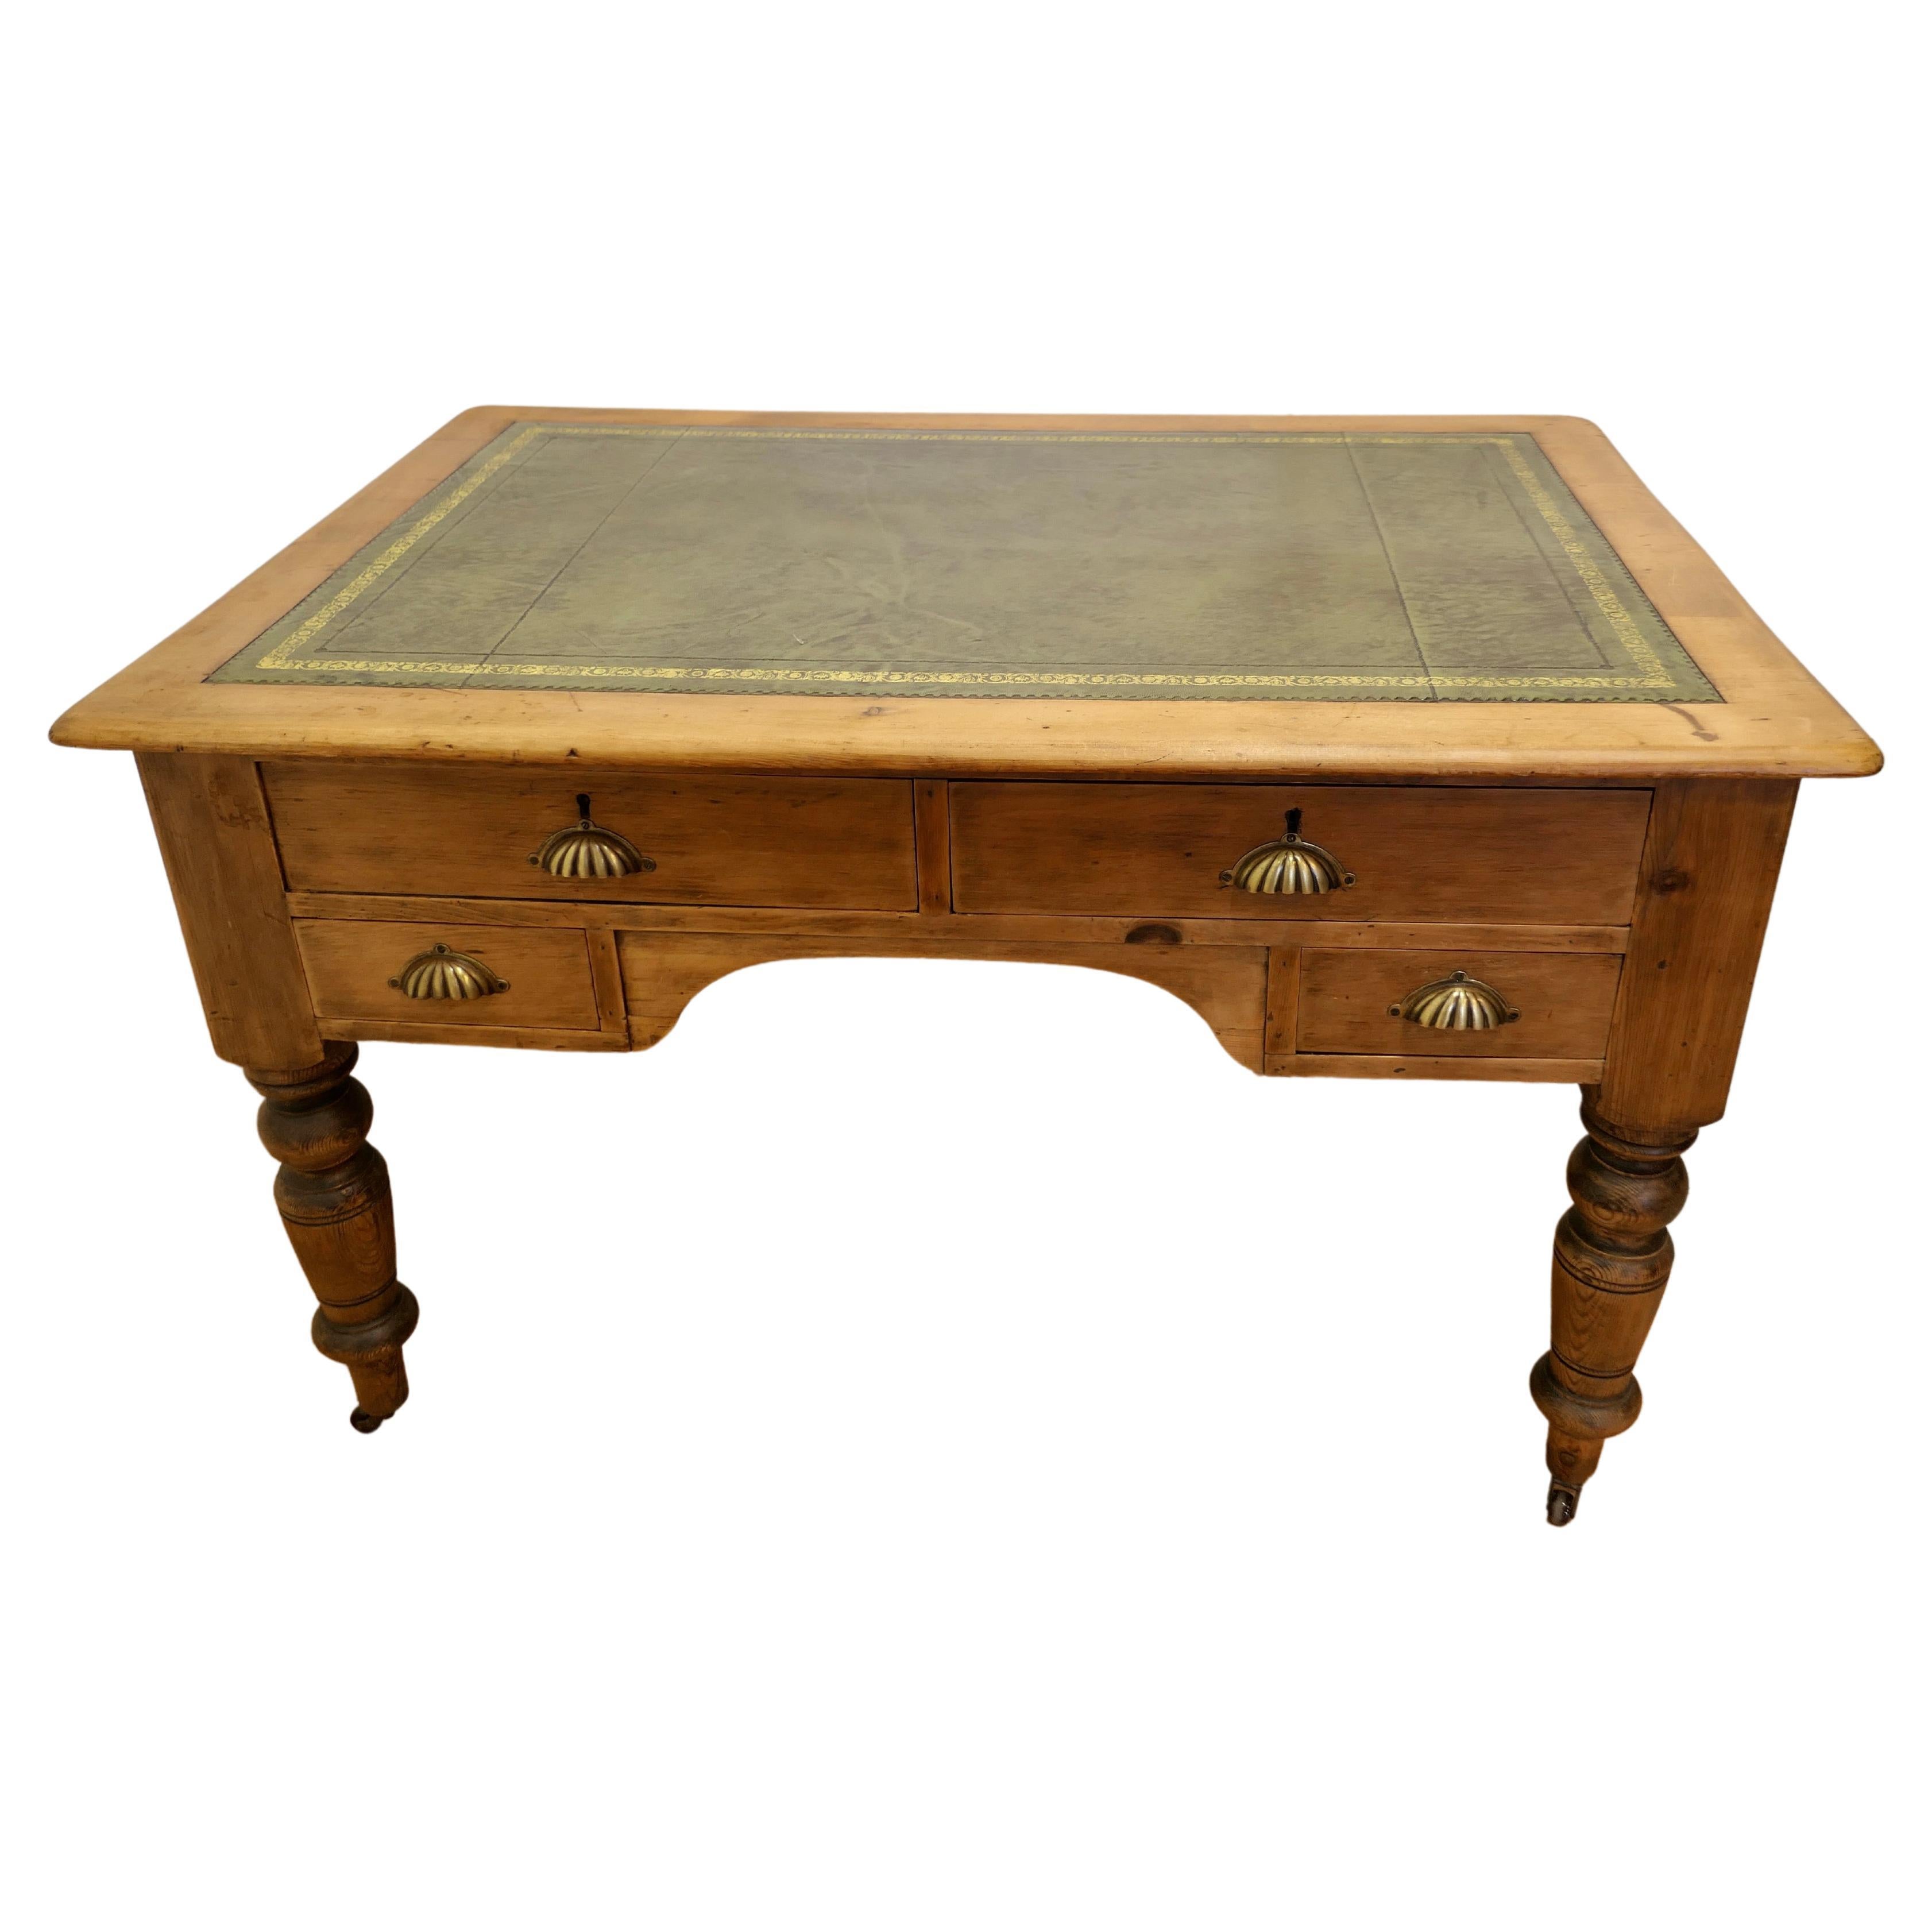 Antique Pine Leather Top Partners Desk, Library Table For Sale